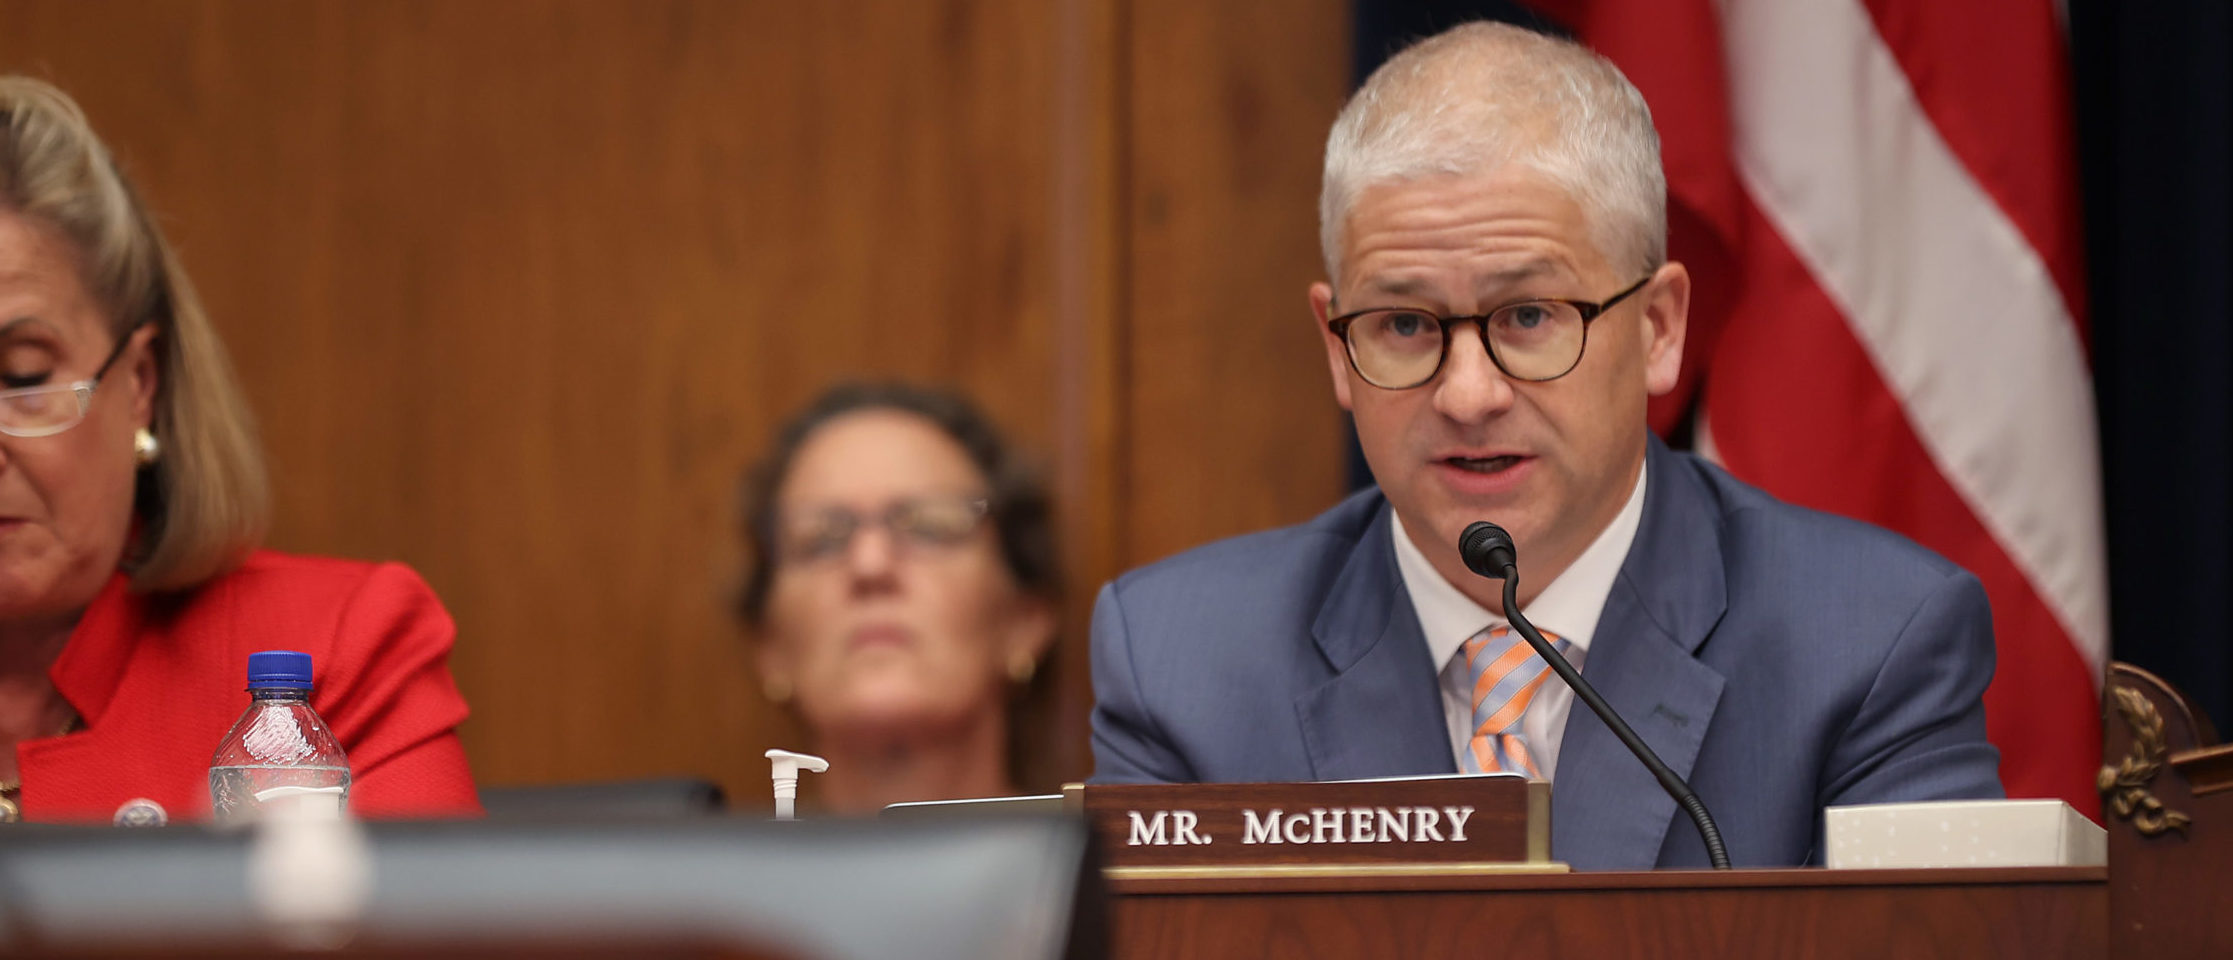 House Financial Services Committee Ranking Member Patrick McHenry delivers remarks at a hearing on July 20. (Chip Somodevilla/Getty Images)